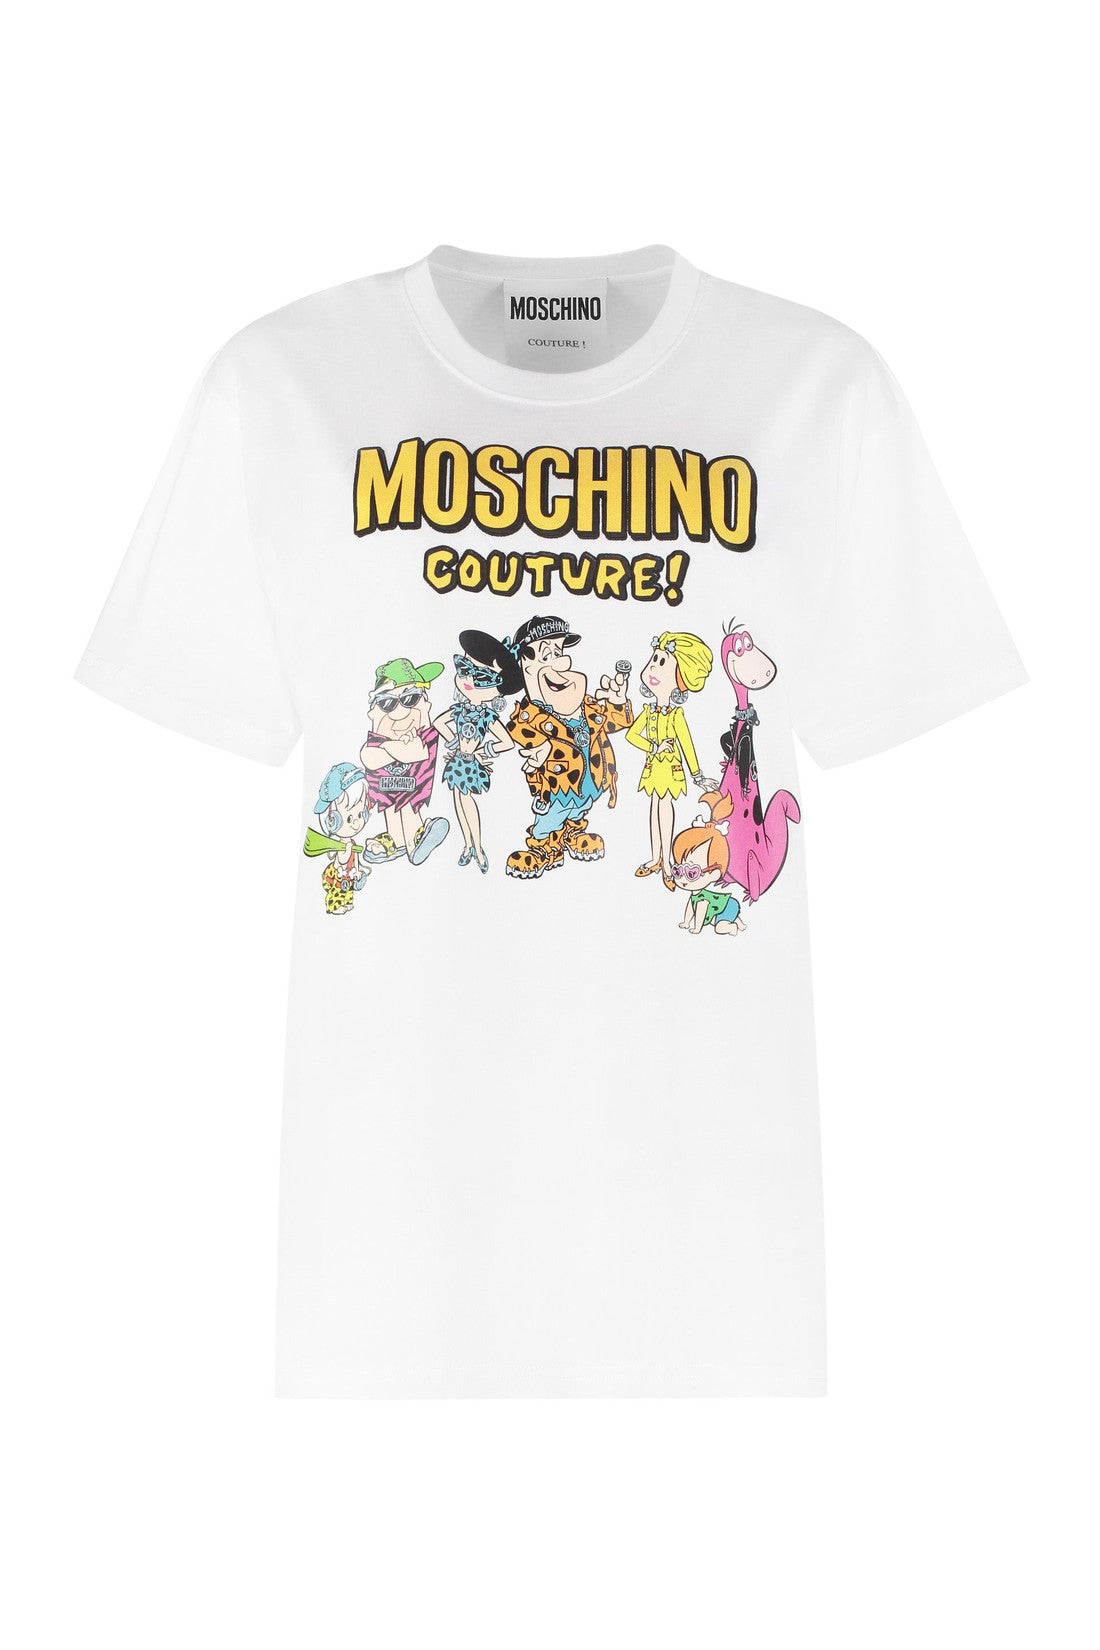 Moschino-OUTLET-SALE-Moschino x The Flintstones™ - Printed cotton T-shirt-ARCHIVIST